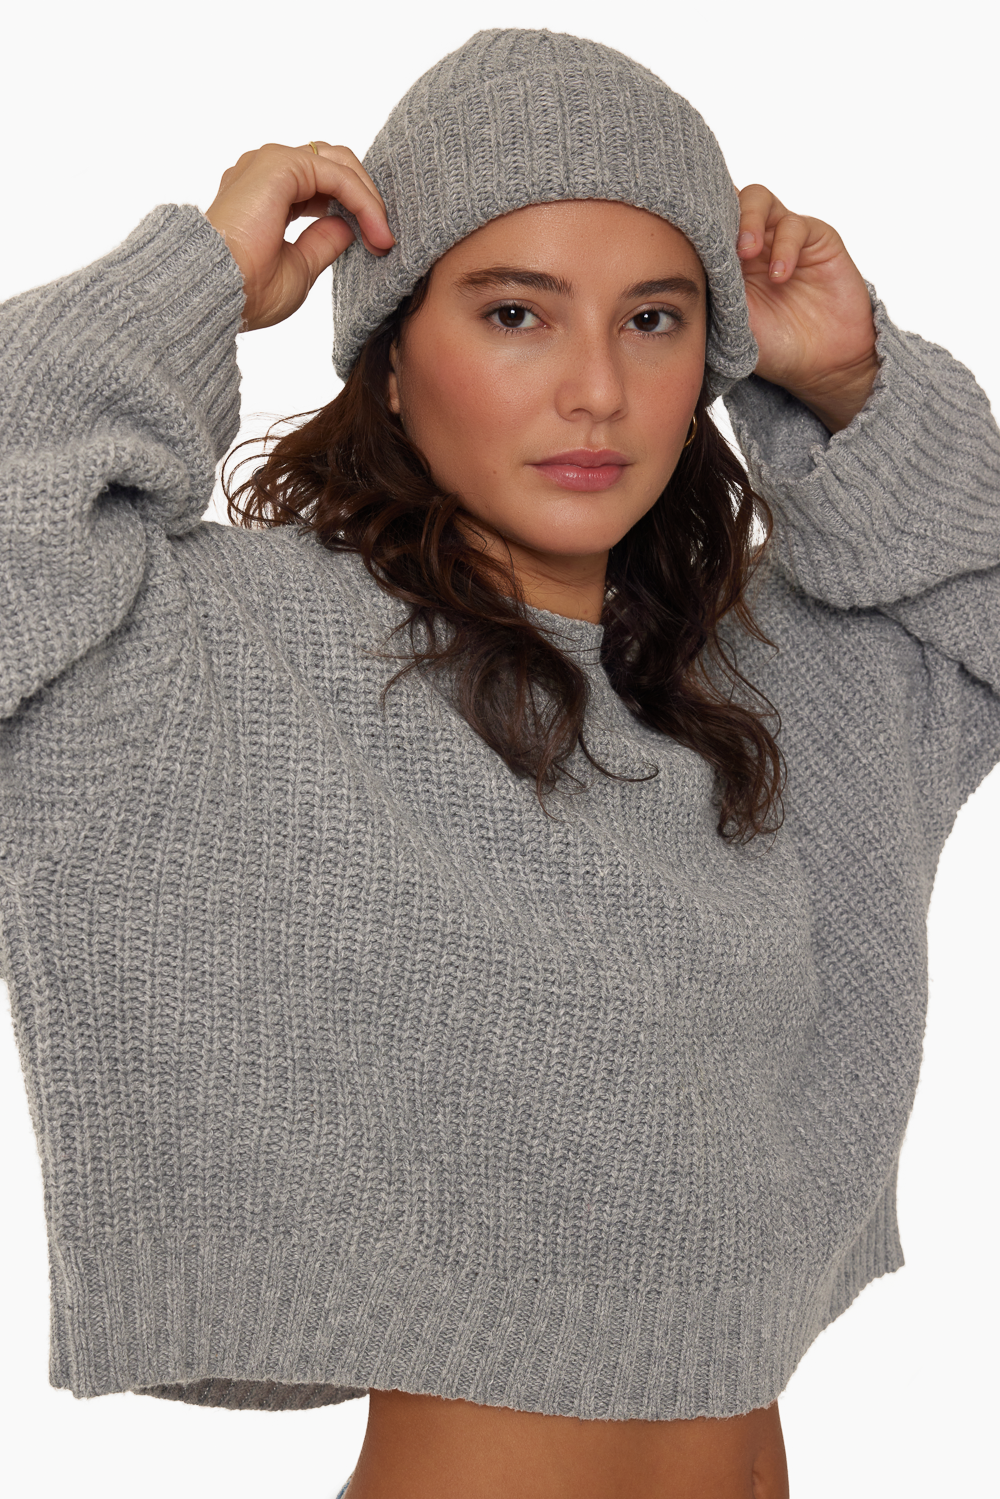 SET™ CLASSIC KNIT BEANIE IN MARBLE